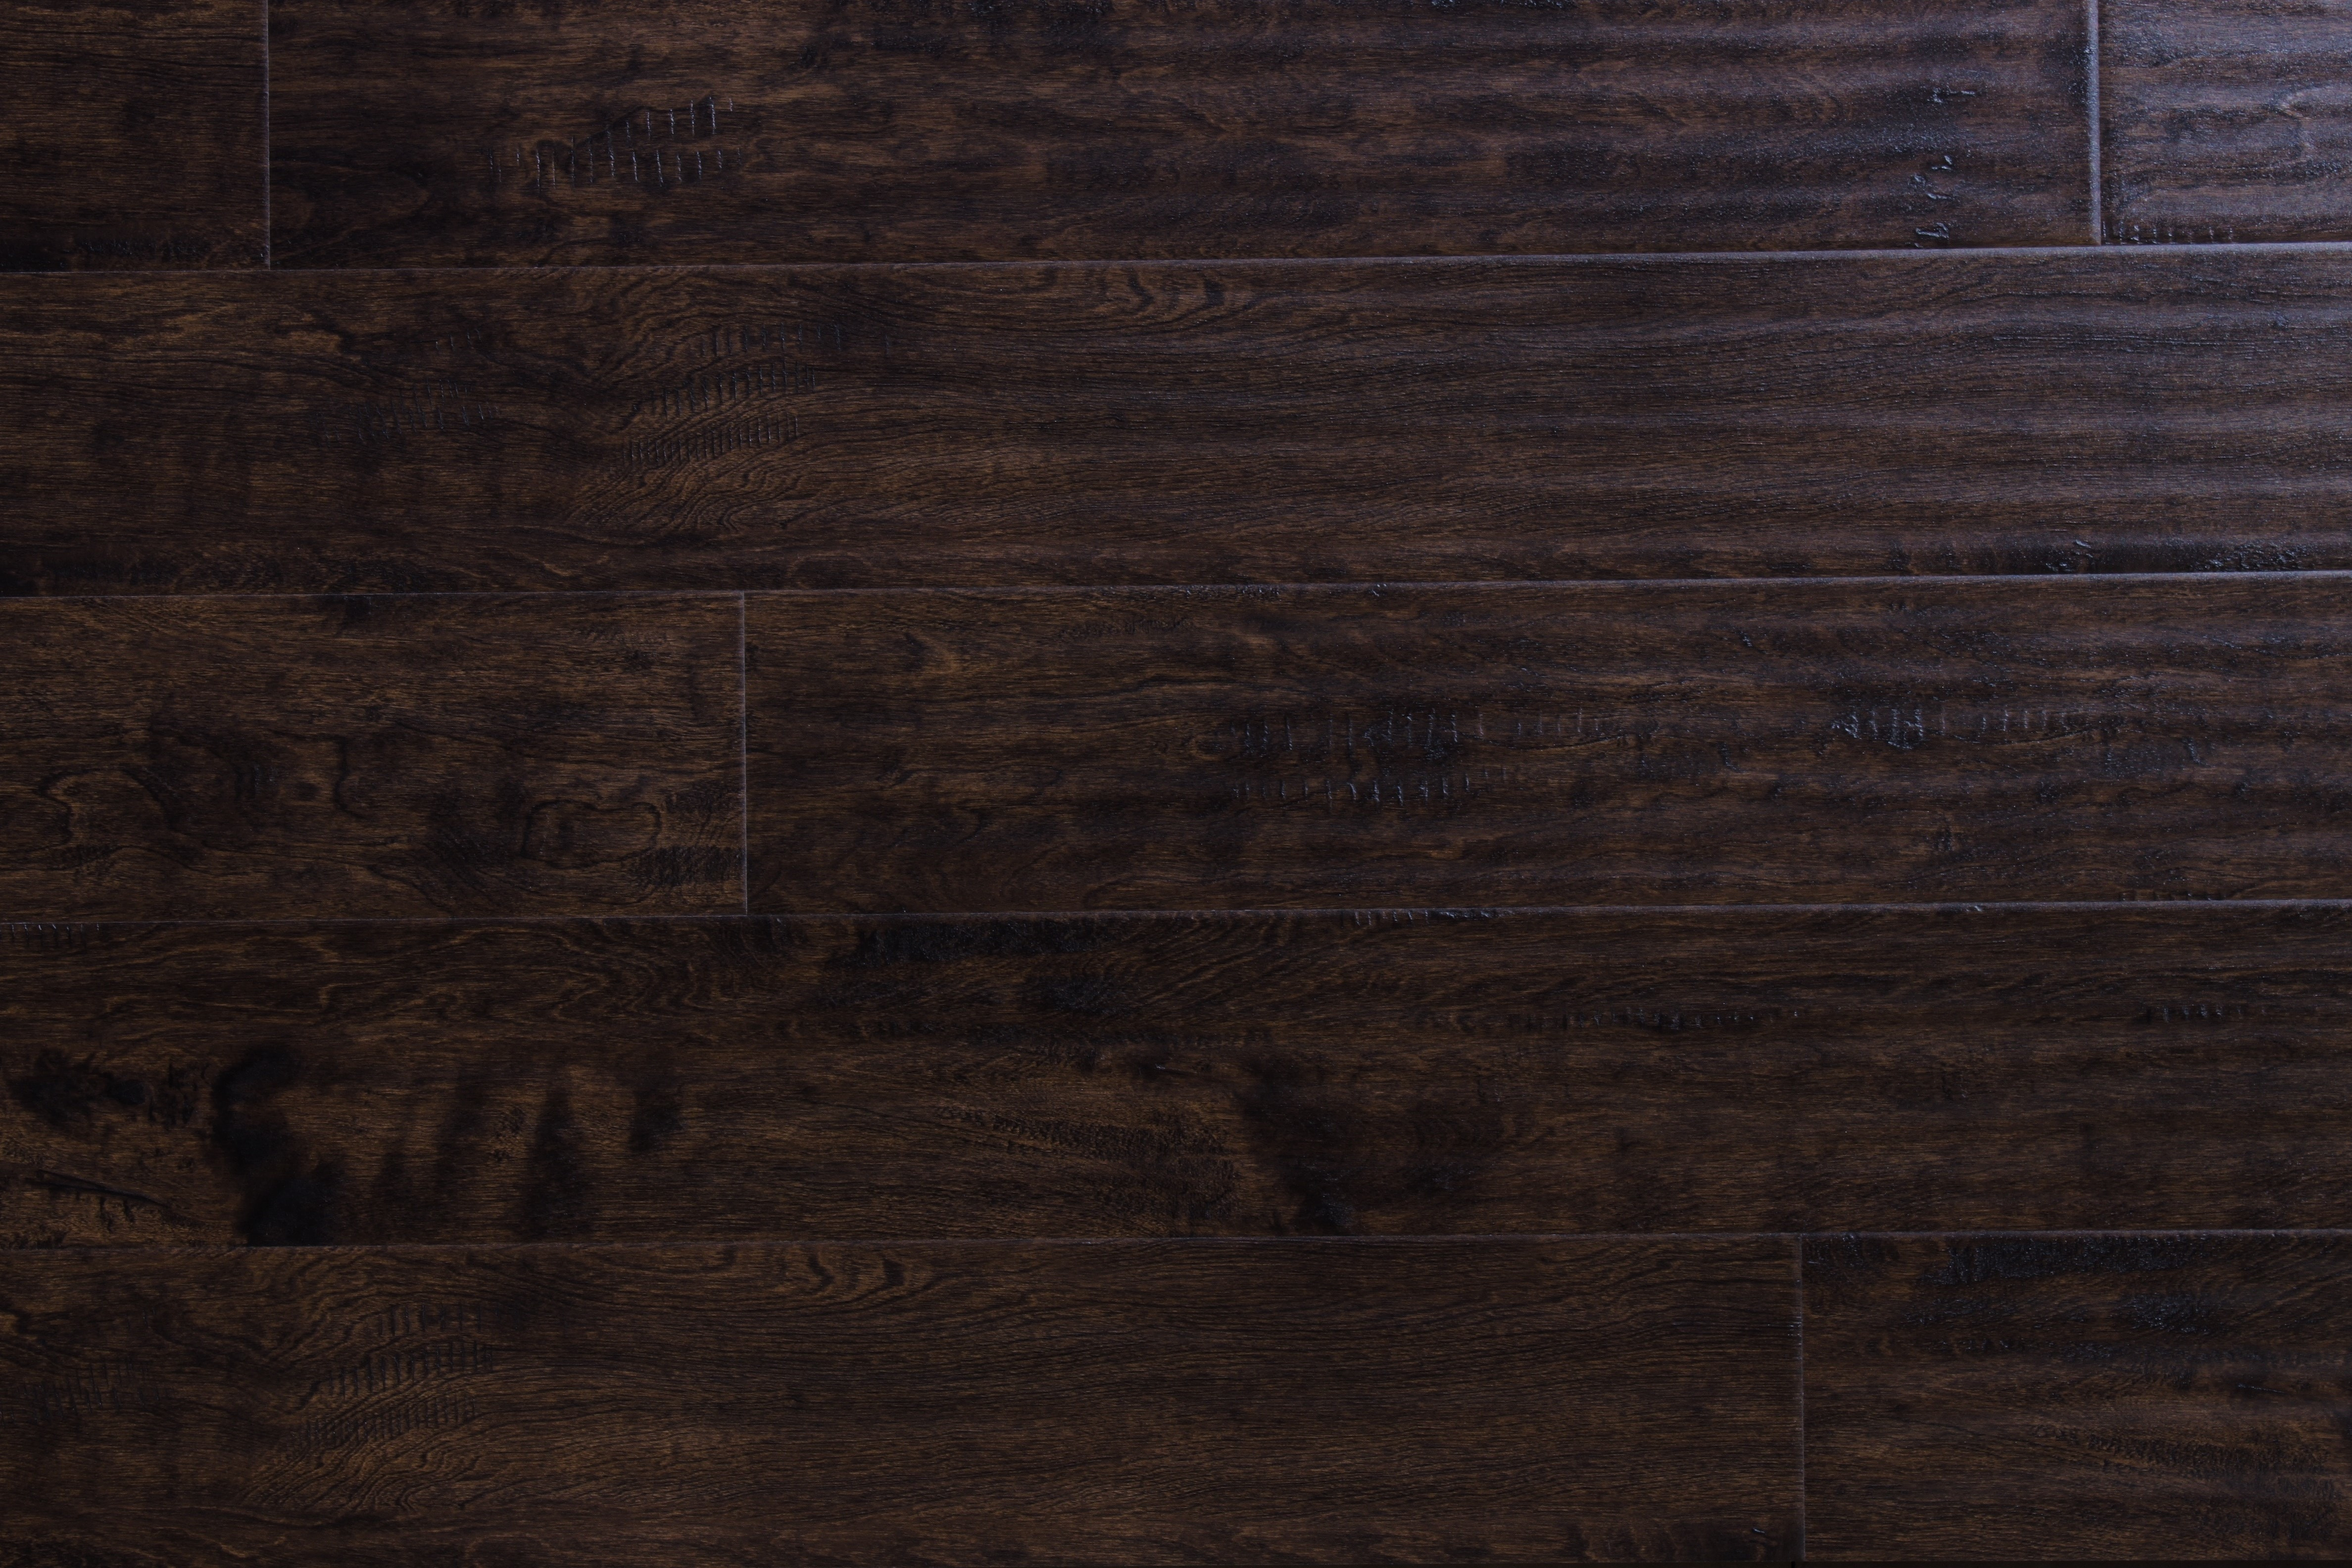 24 Great Jasper Prefinished Oak Hardwood Flooring Reviews 2024 free download jasper prefinished oak hardwood flooring reviews of wood flooring free samples available at builddirecta intended for tailor multi gb 5874277bb8d3c